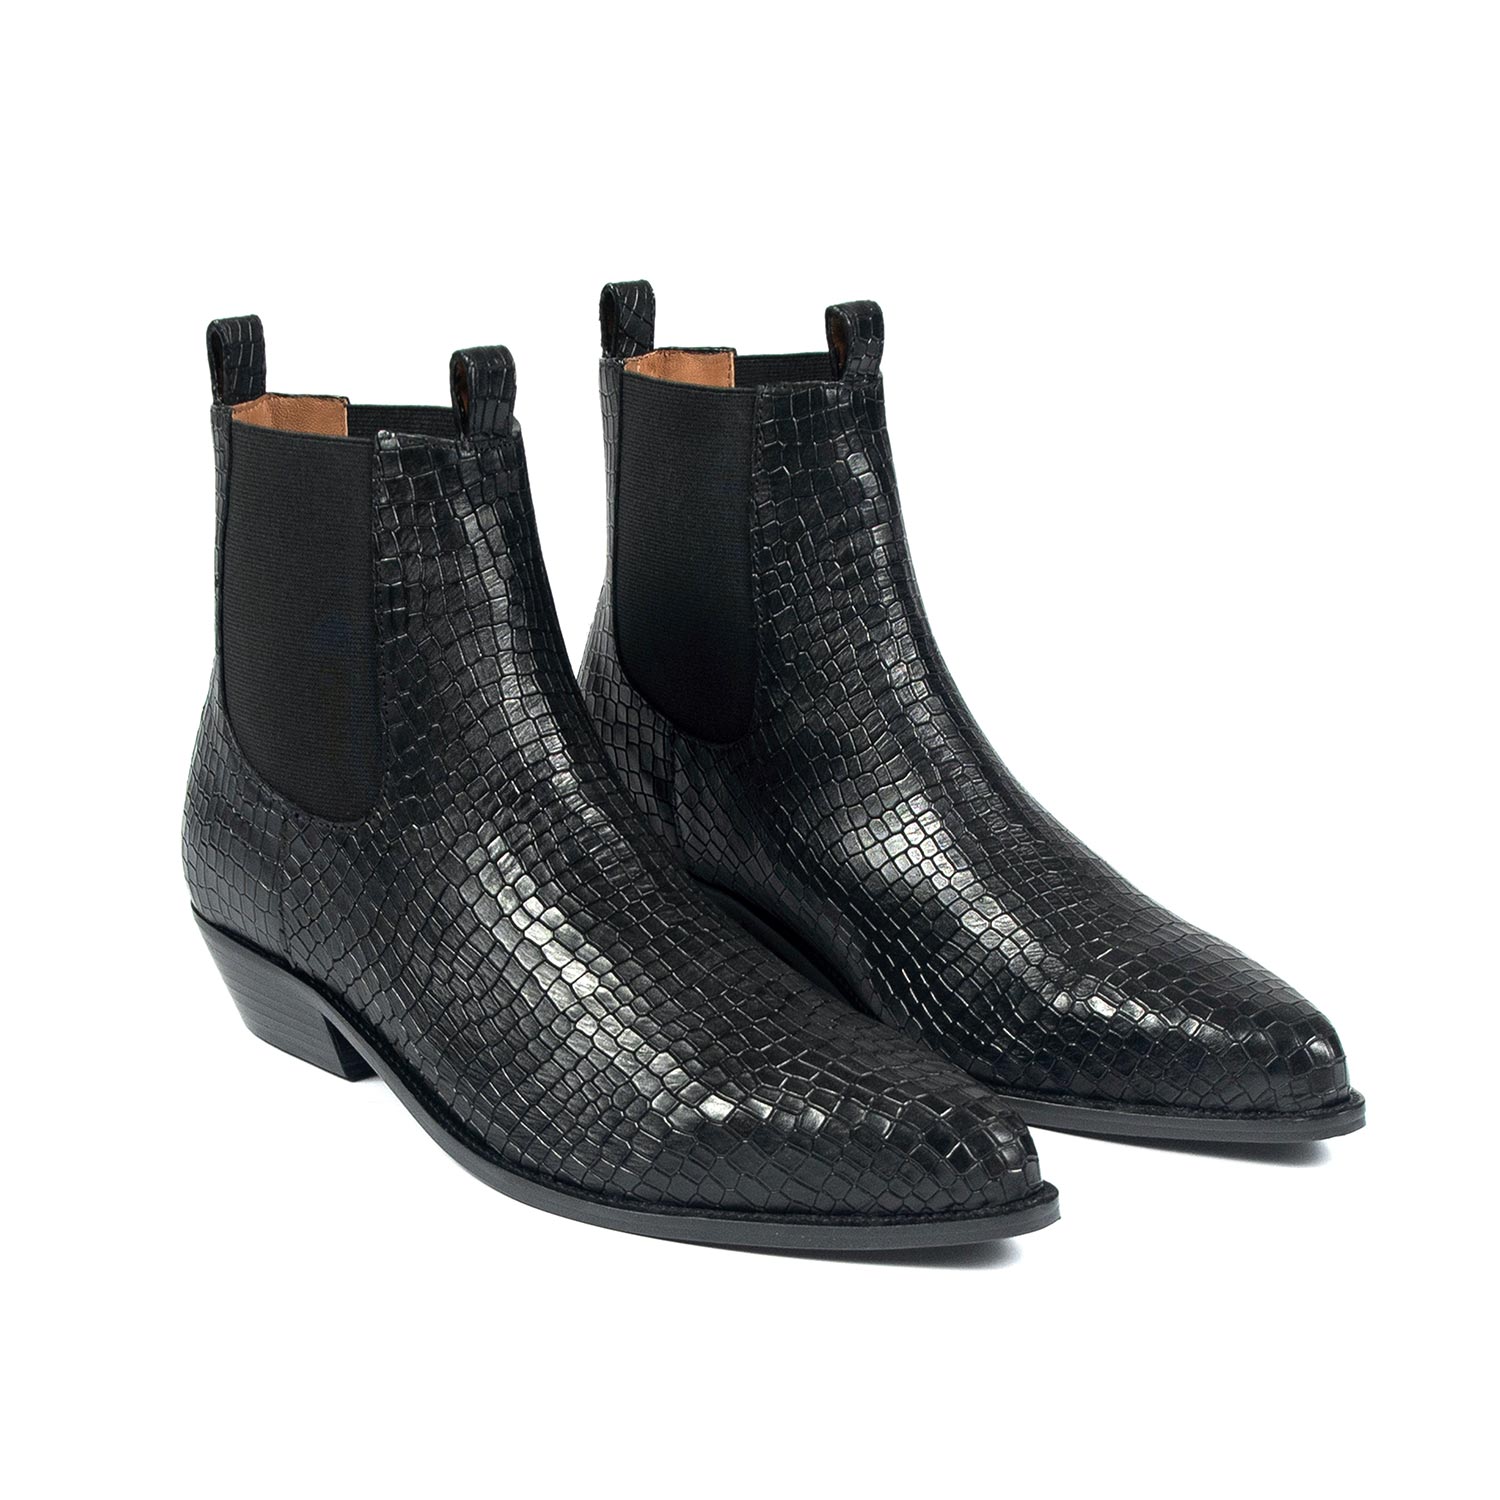 Addison - Black Snakeskin Leather Boots | To Hell Apparel